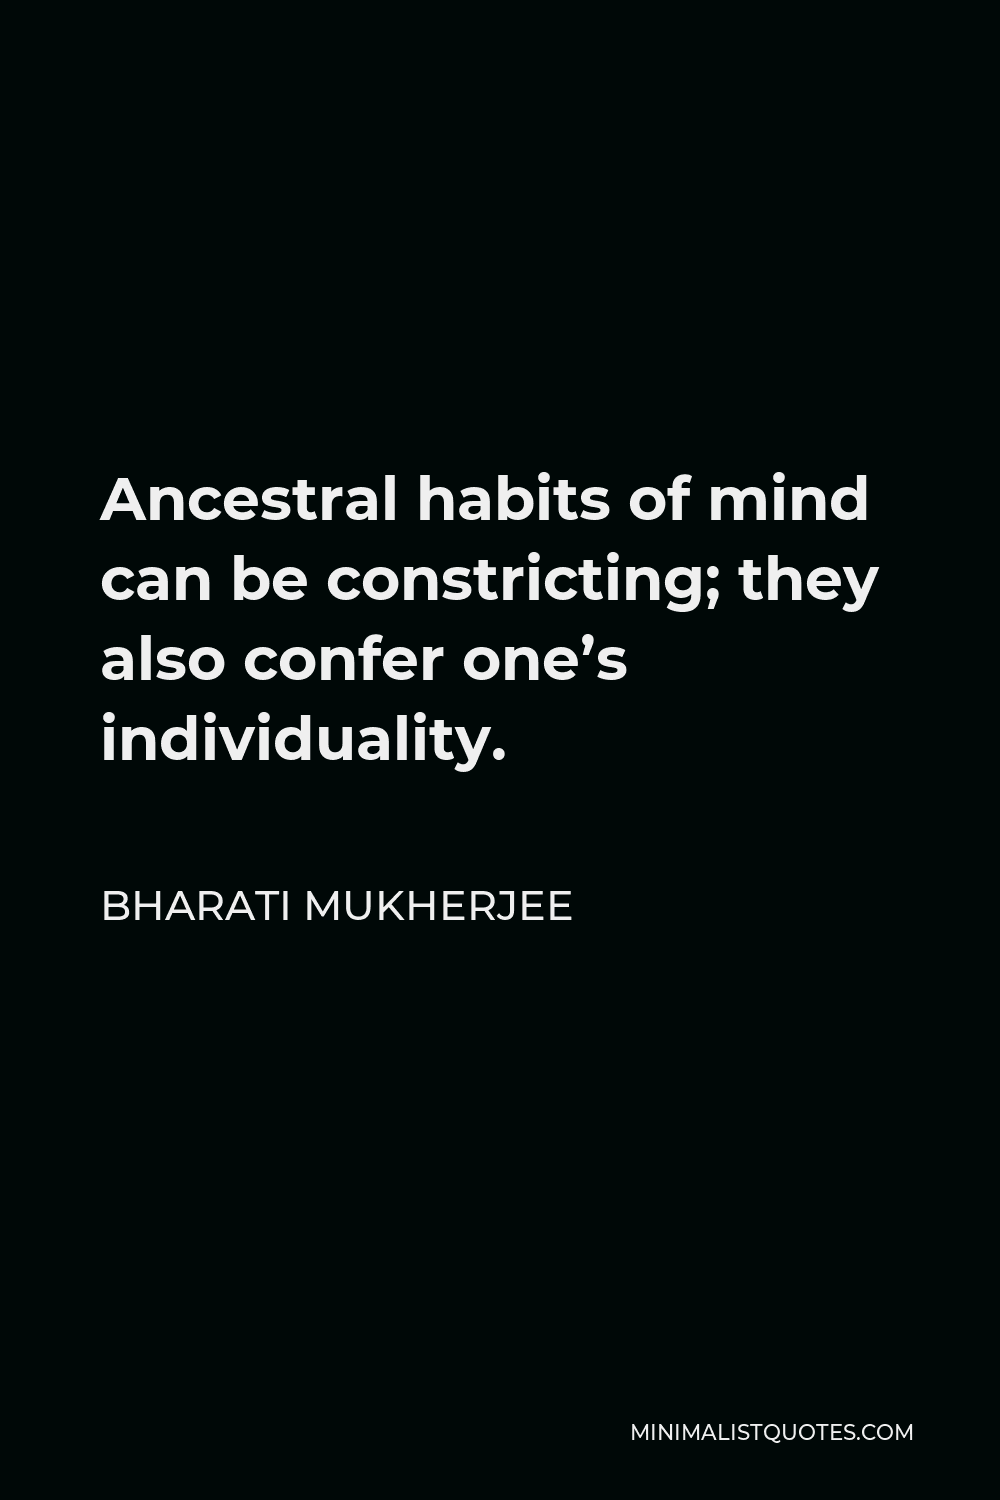 Bharati Mukherjee Quote - Ancestral habits of mind can be constricting; they also confer one’s individuality.